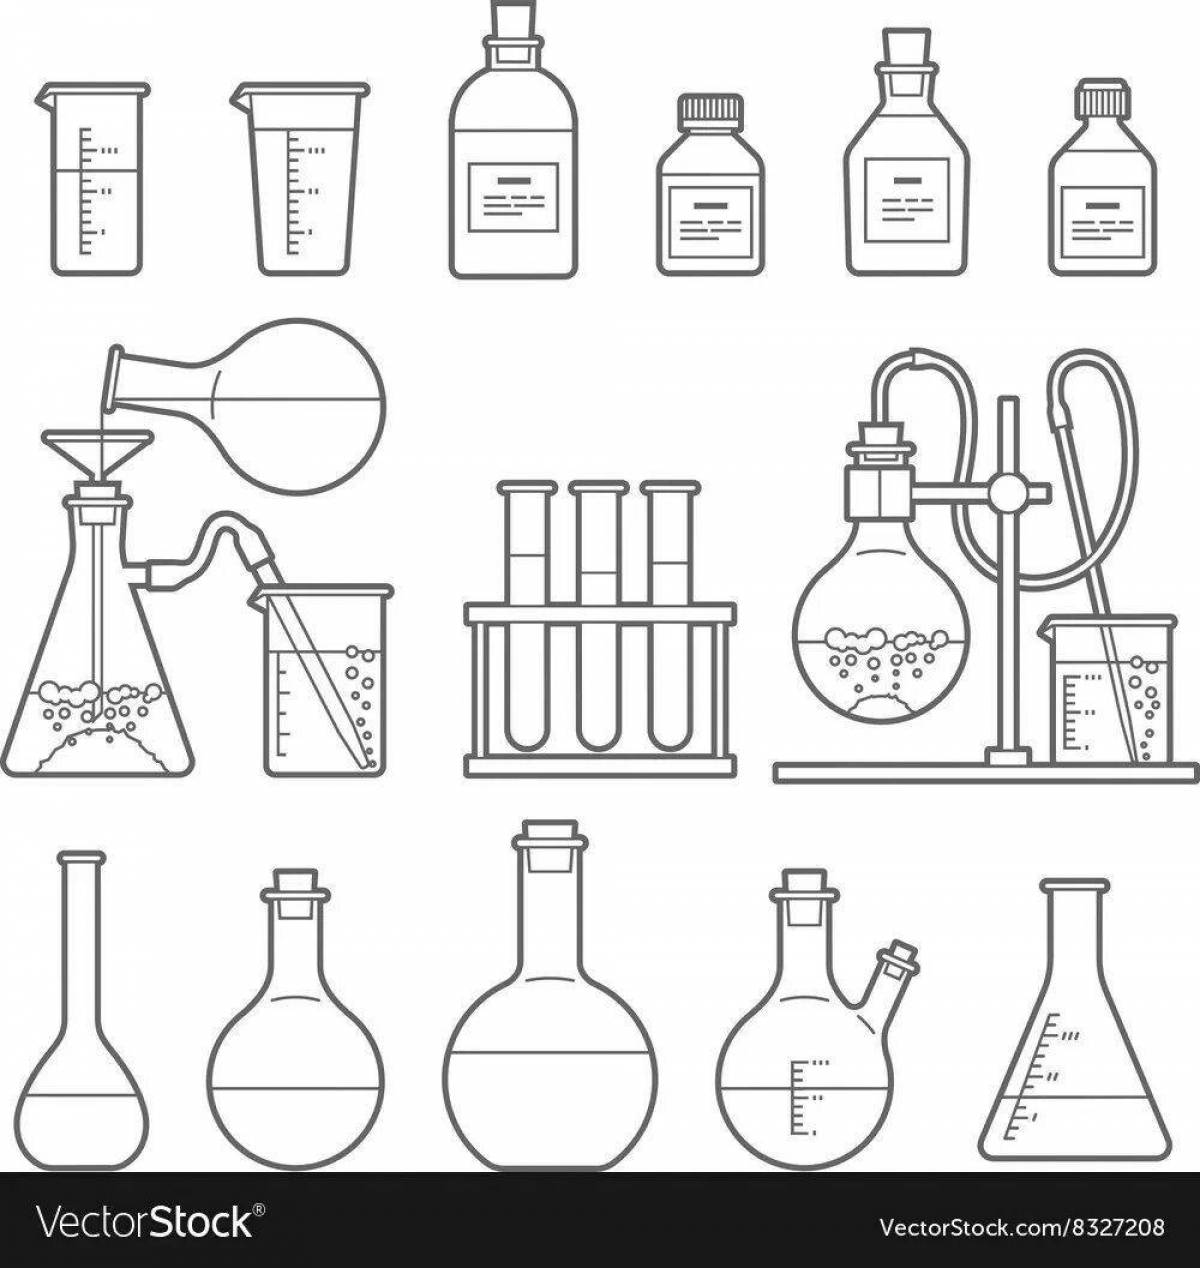 Coloring page bold chemical flasks